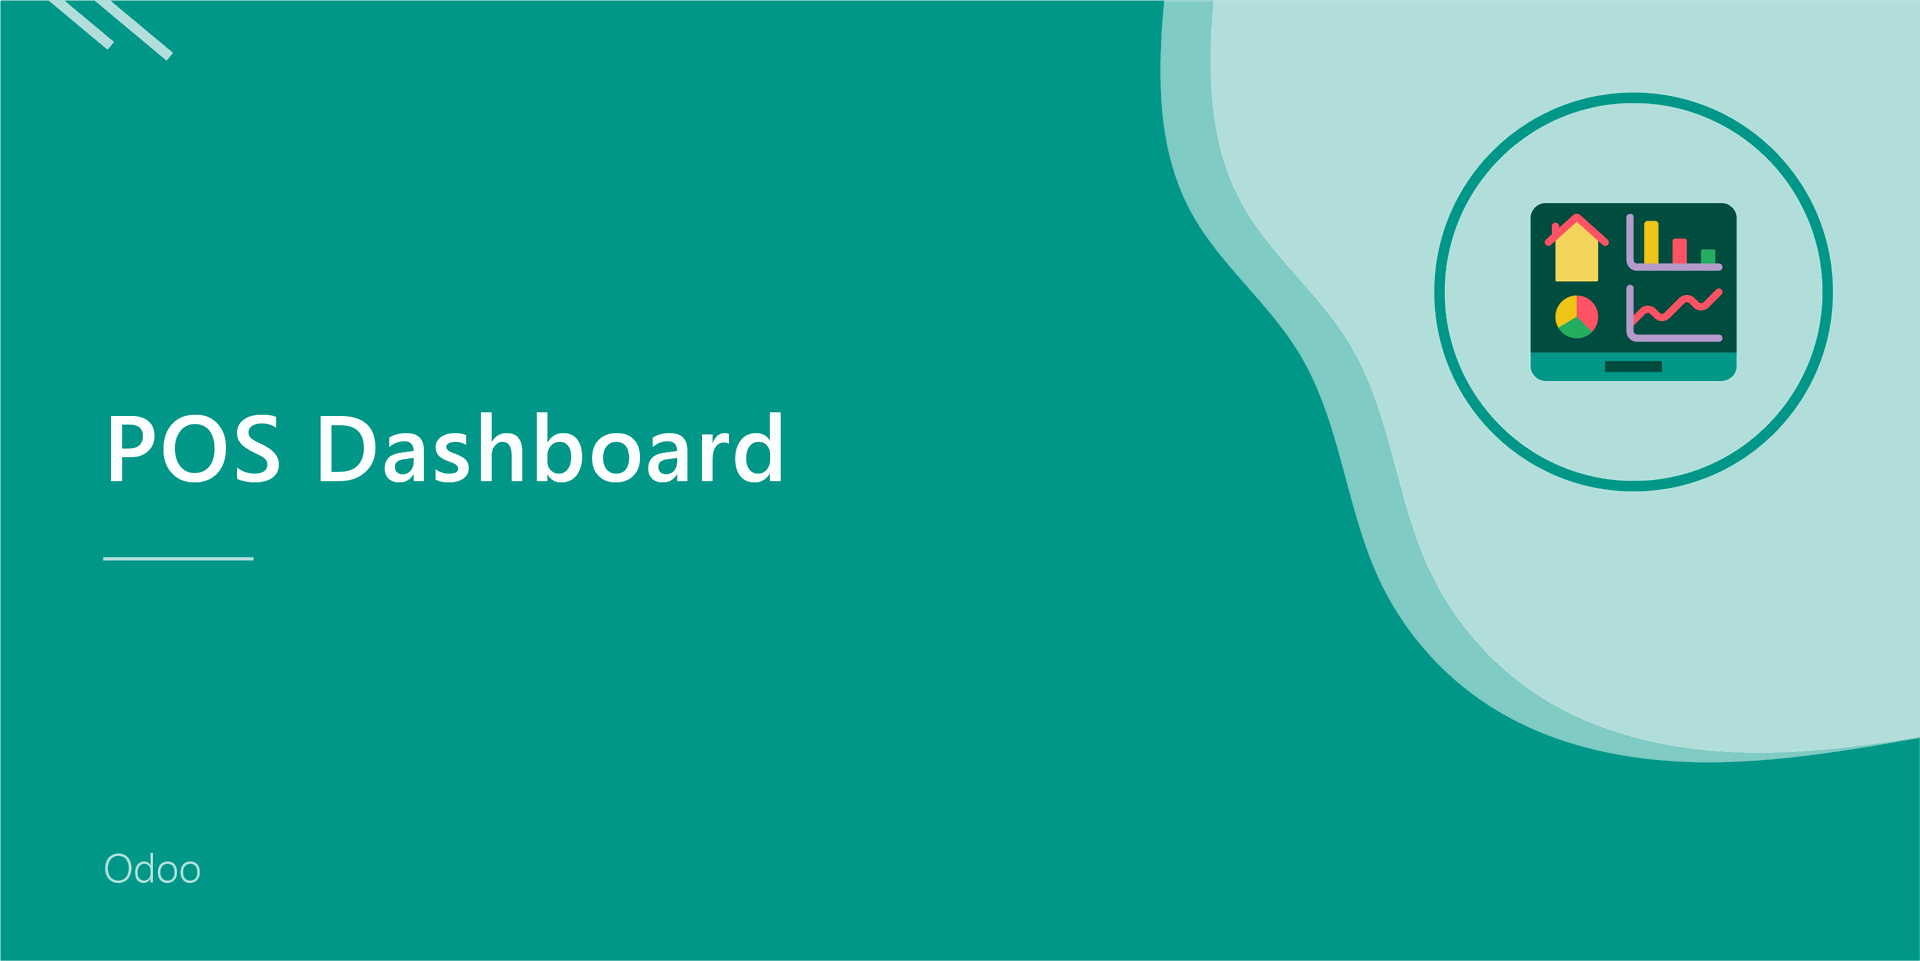 Point of Sale Dashboard
